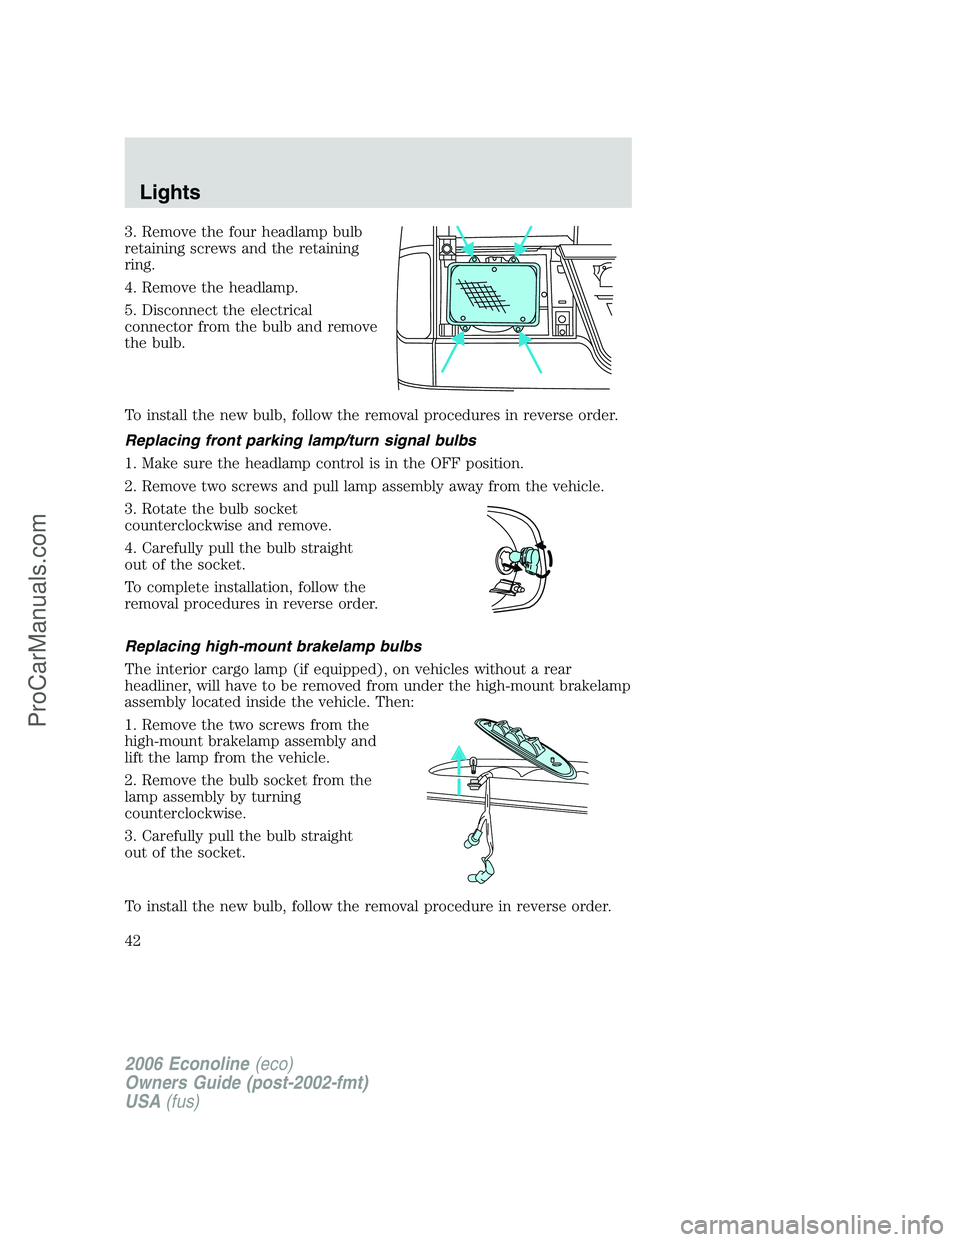 FORD E-150 2006 Service Manual 3. Remove the four headlamp bulb
retaining screws and the retaining
ring.
4. Remove the headlamp.
5. Disconnect the electrical
connector from the bulb and remove
the bulb.
To install the new bulb, fol